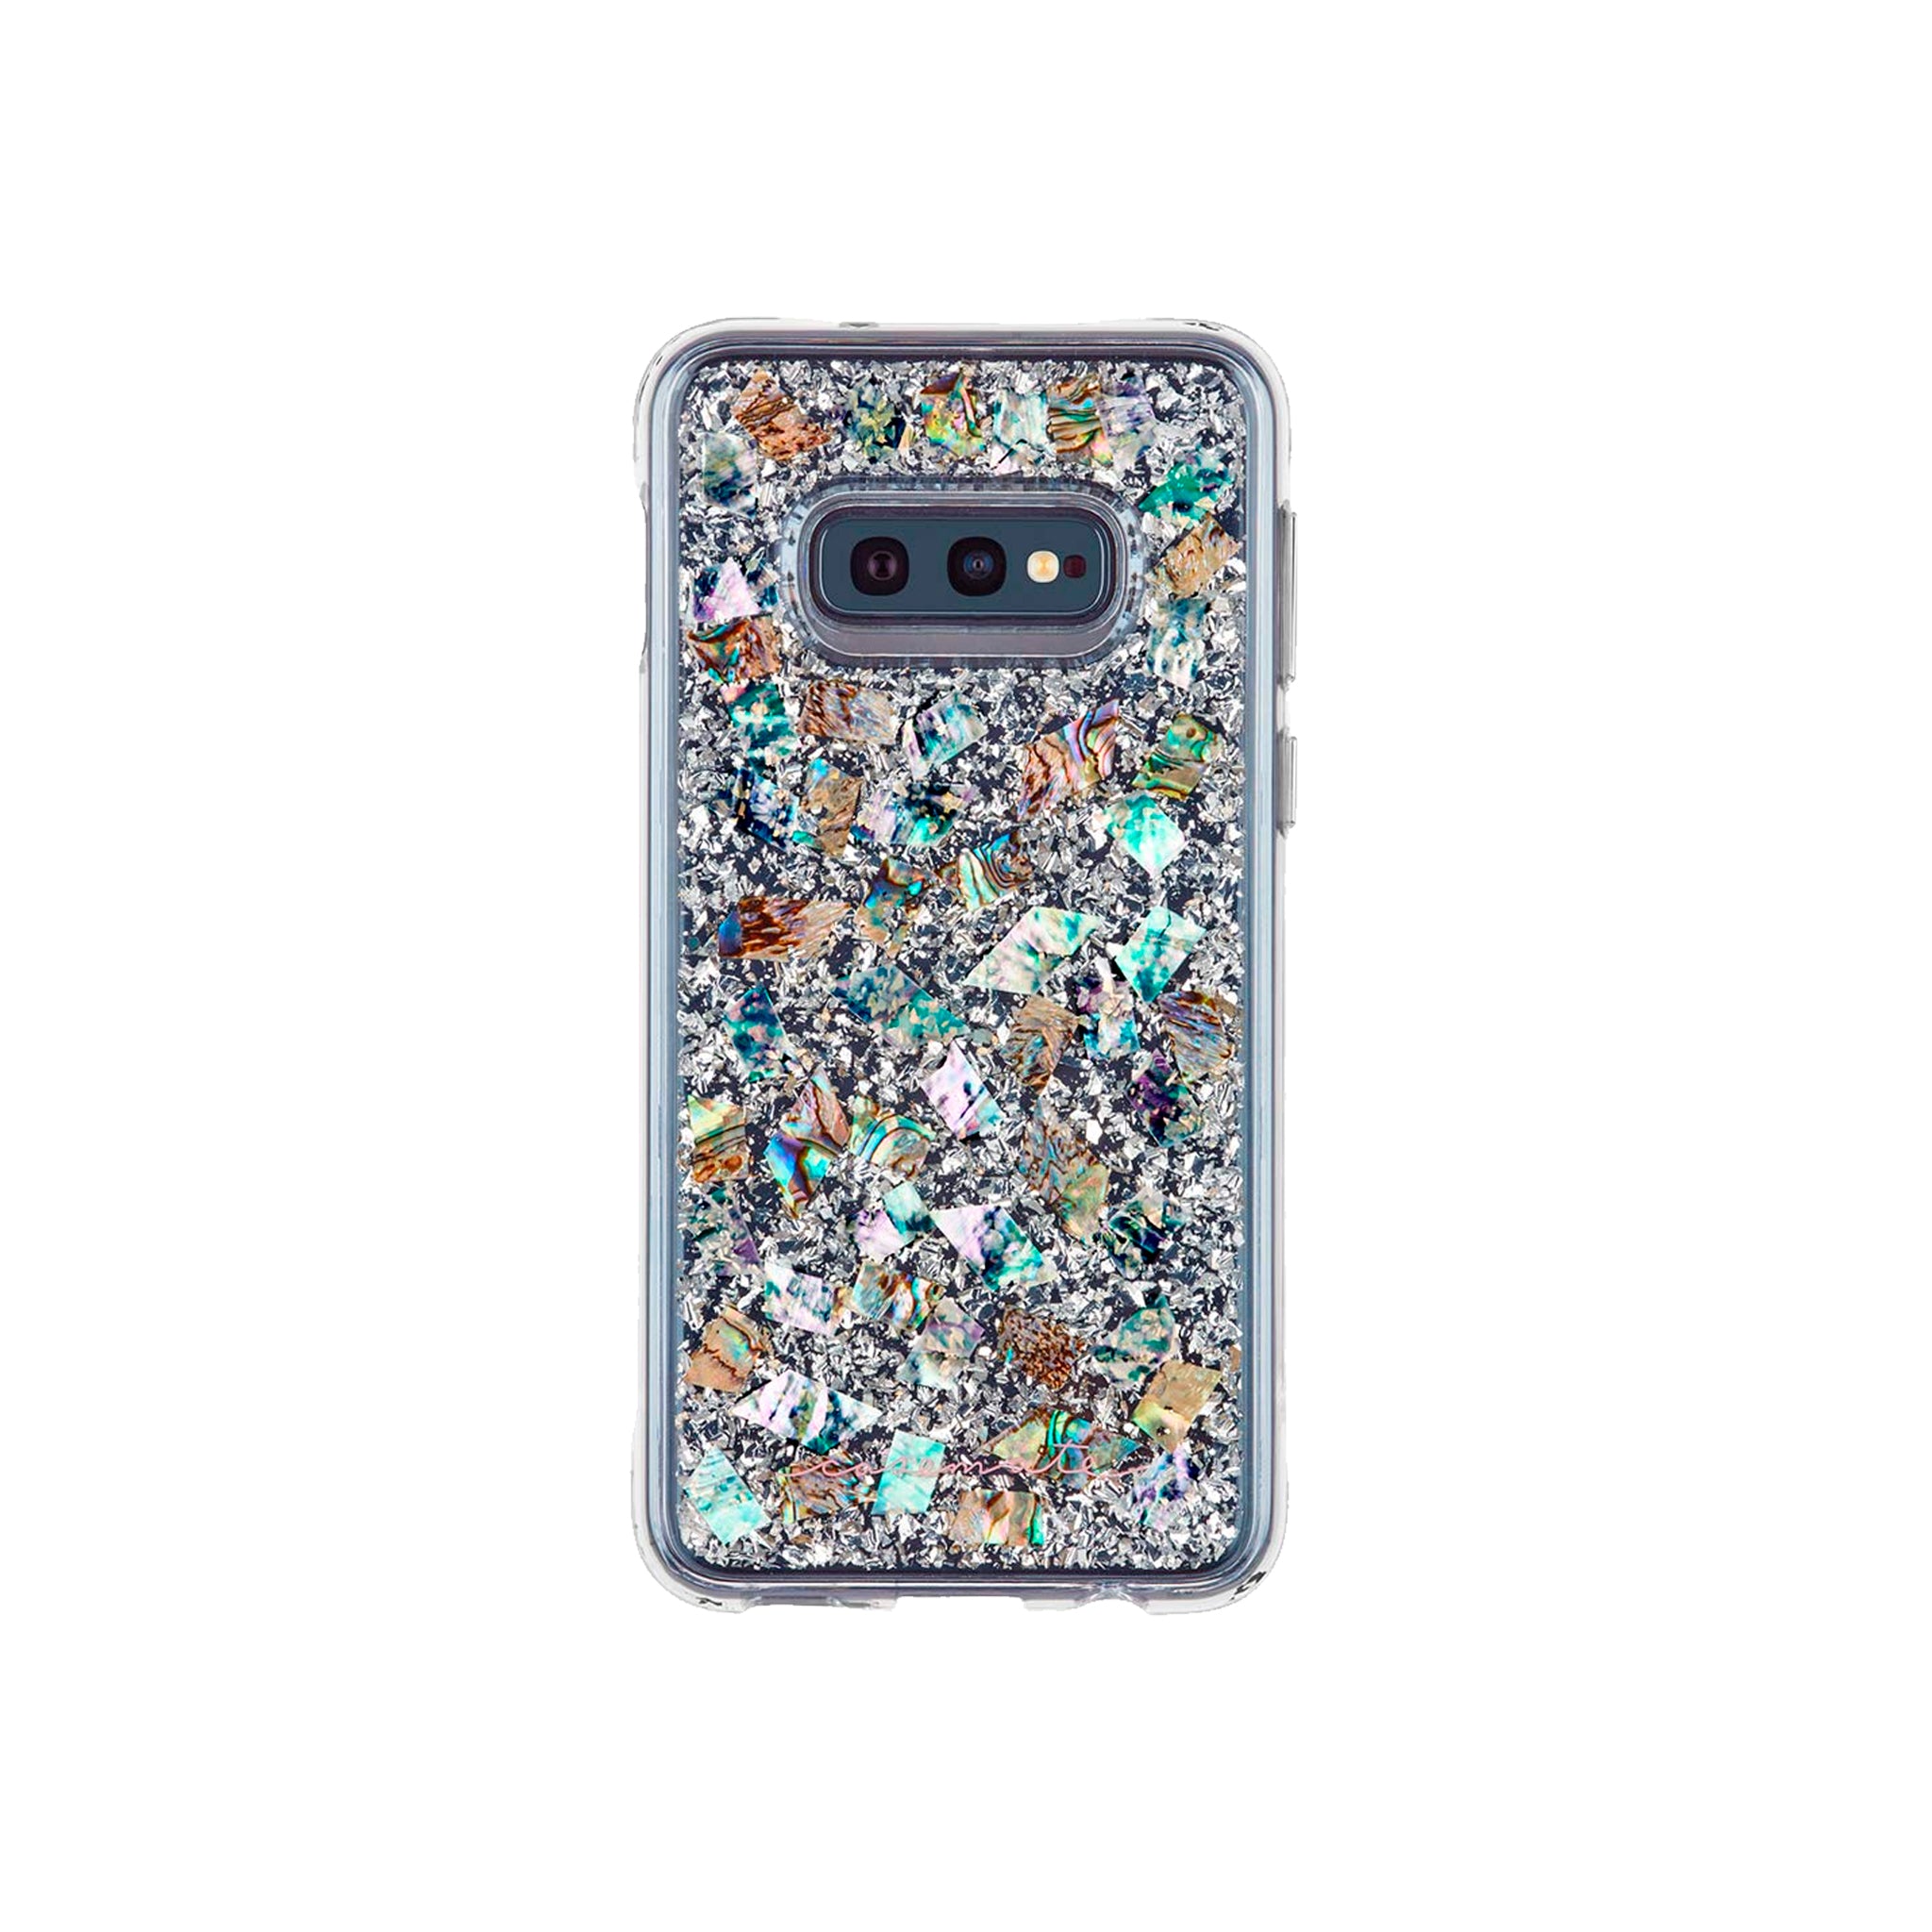 Case-mate - Karat Case For Samsung Galaxy S10e - Mother Of Pearl